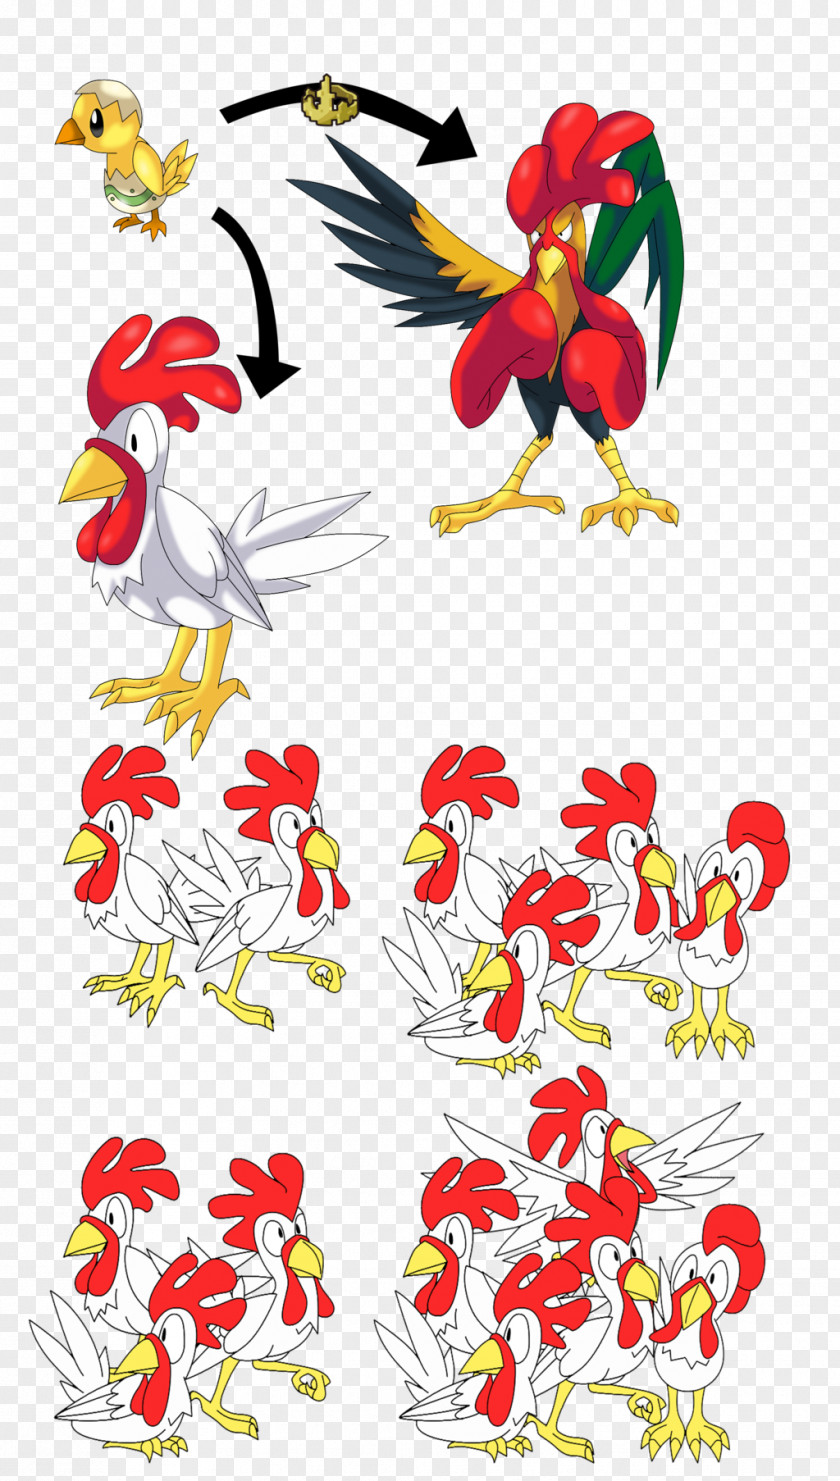 Chicken Rooster Or The Egg KFC PNG